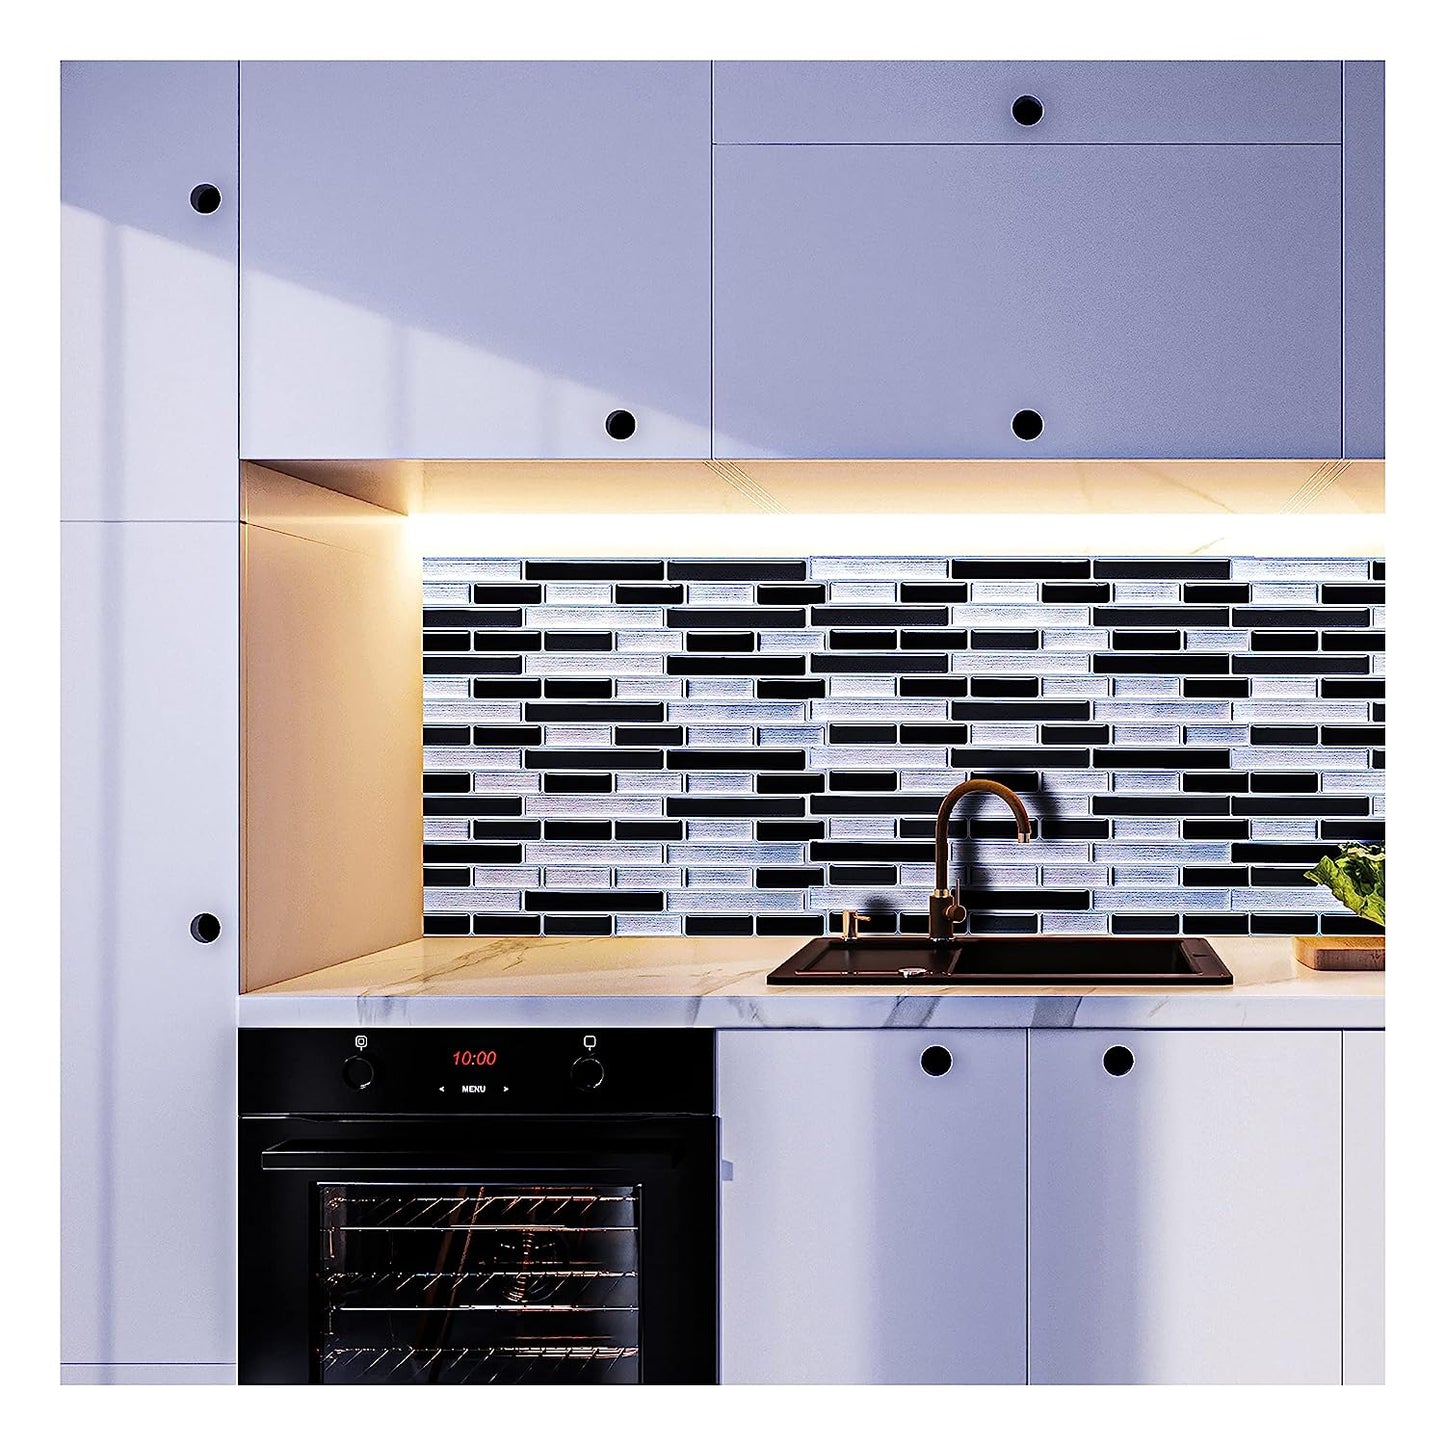 Tiles Peel and Stick Kitchen Stickers for Wall Tiles for Kitchen Backsplash, Size-27.9 cm x 23.4 cm (Set of 10)